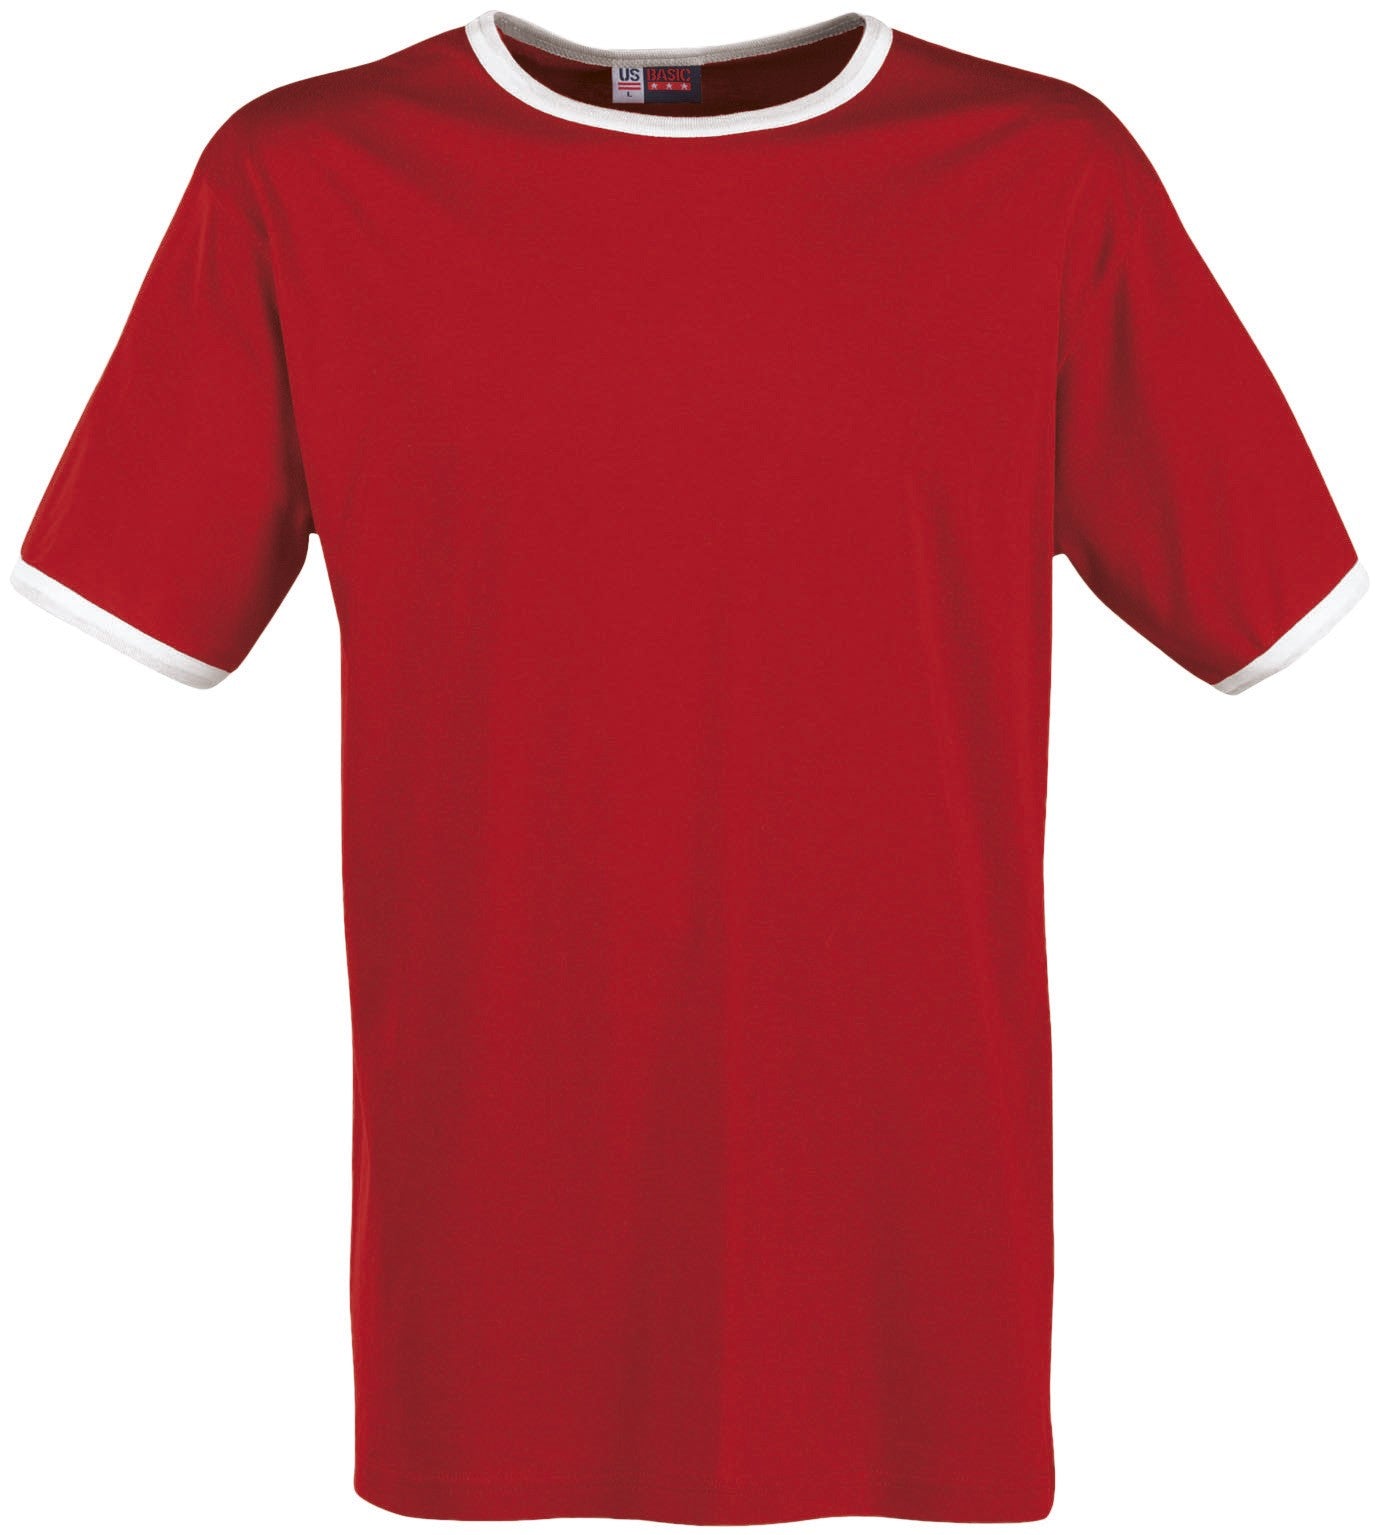 Mens Adelaide Contrast T-Shirt - Red Only